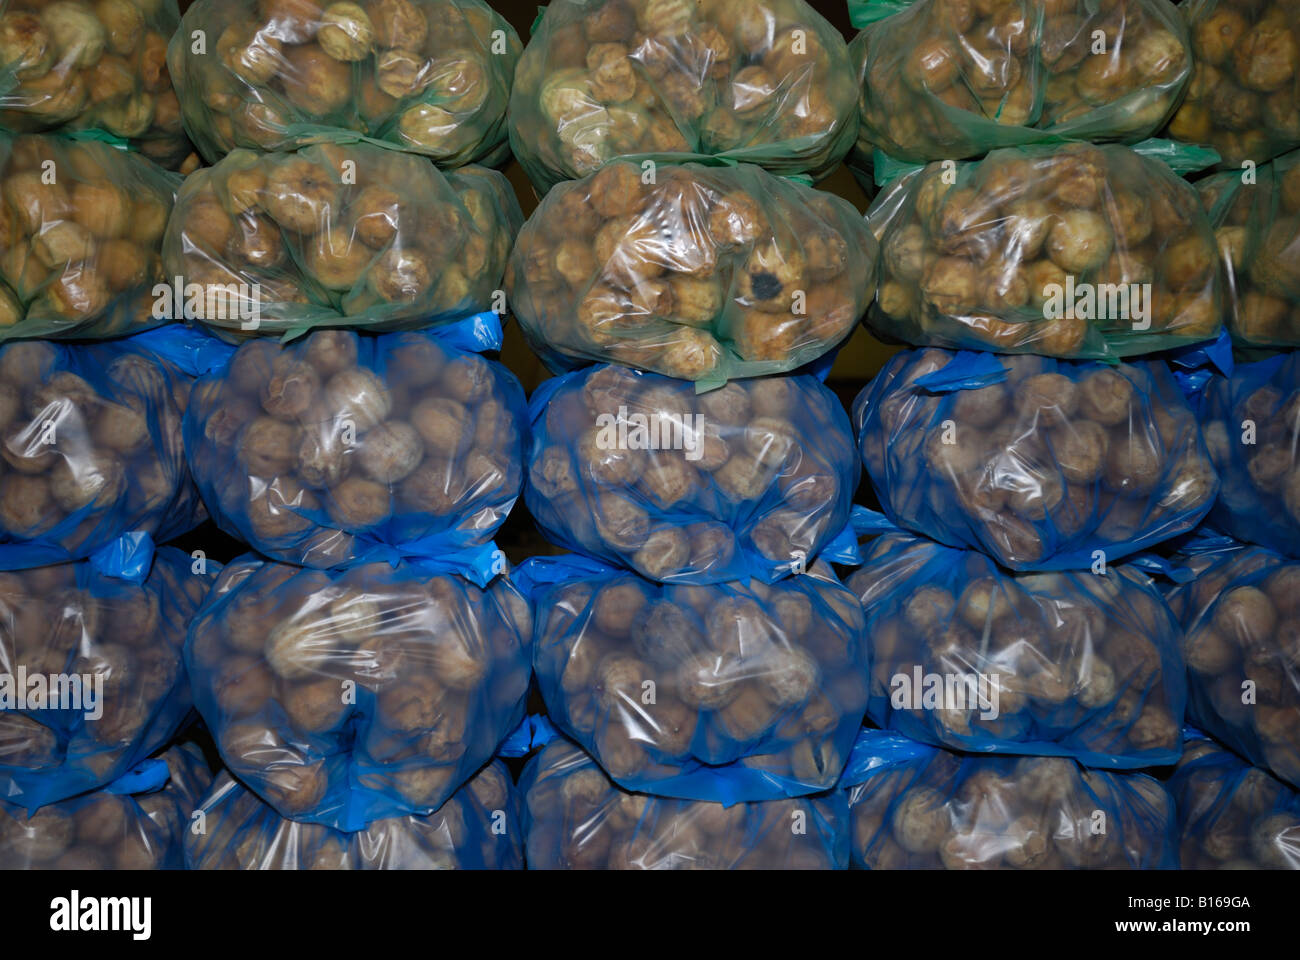 Dried lemons on sale in the vegetable souk (market) in the town of Nizwa, in the Sultanate of Oman. Stock Photo